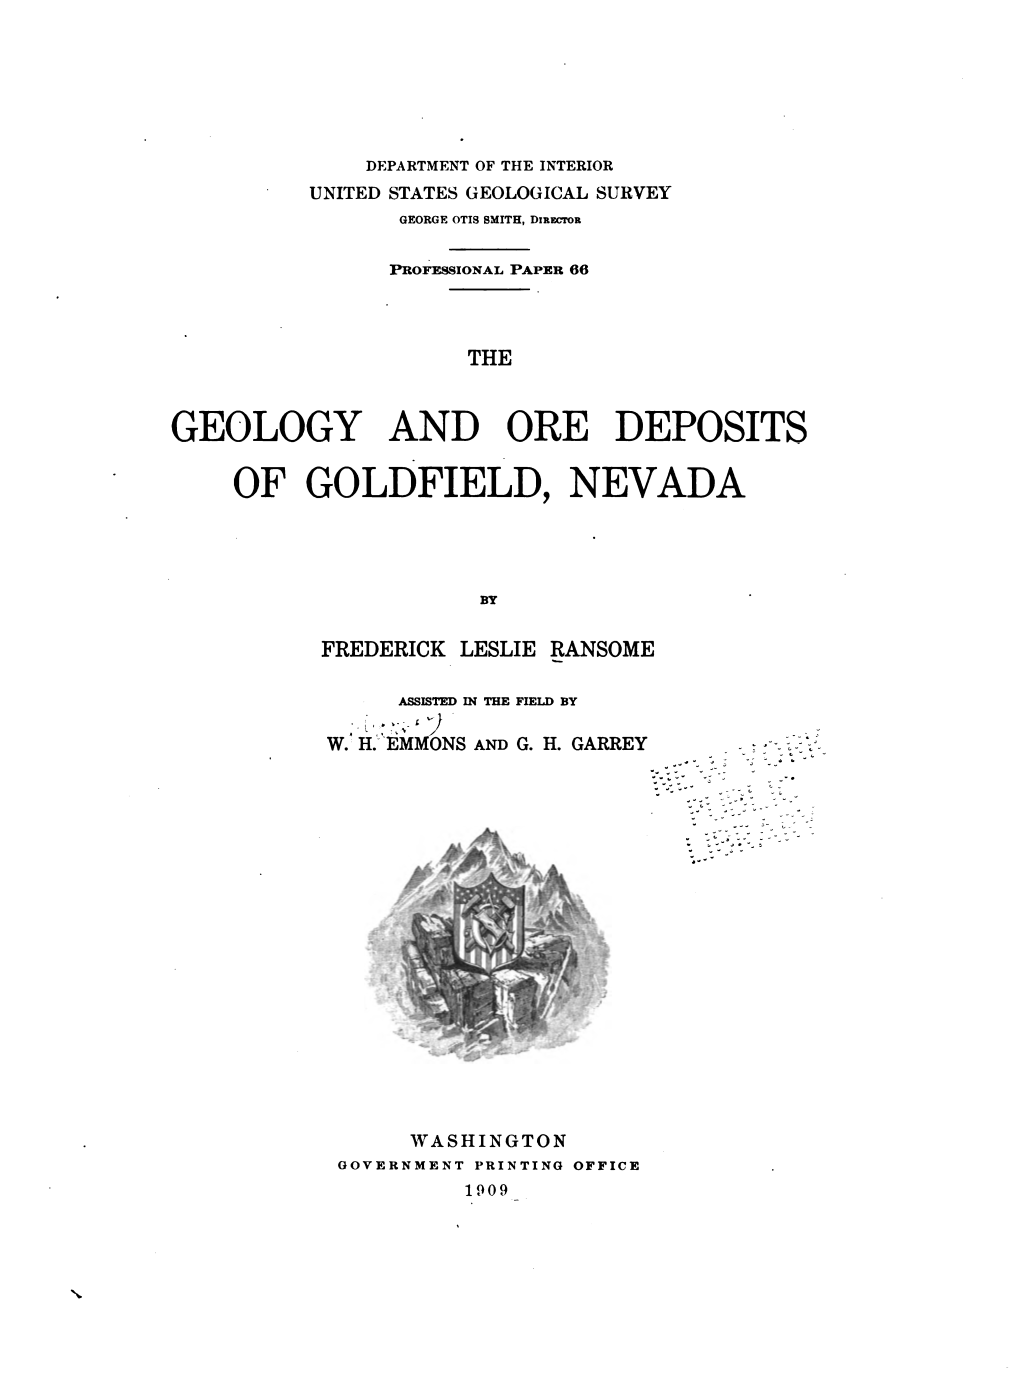 The Geology and Ore Deposits of Goldfield, Nevada